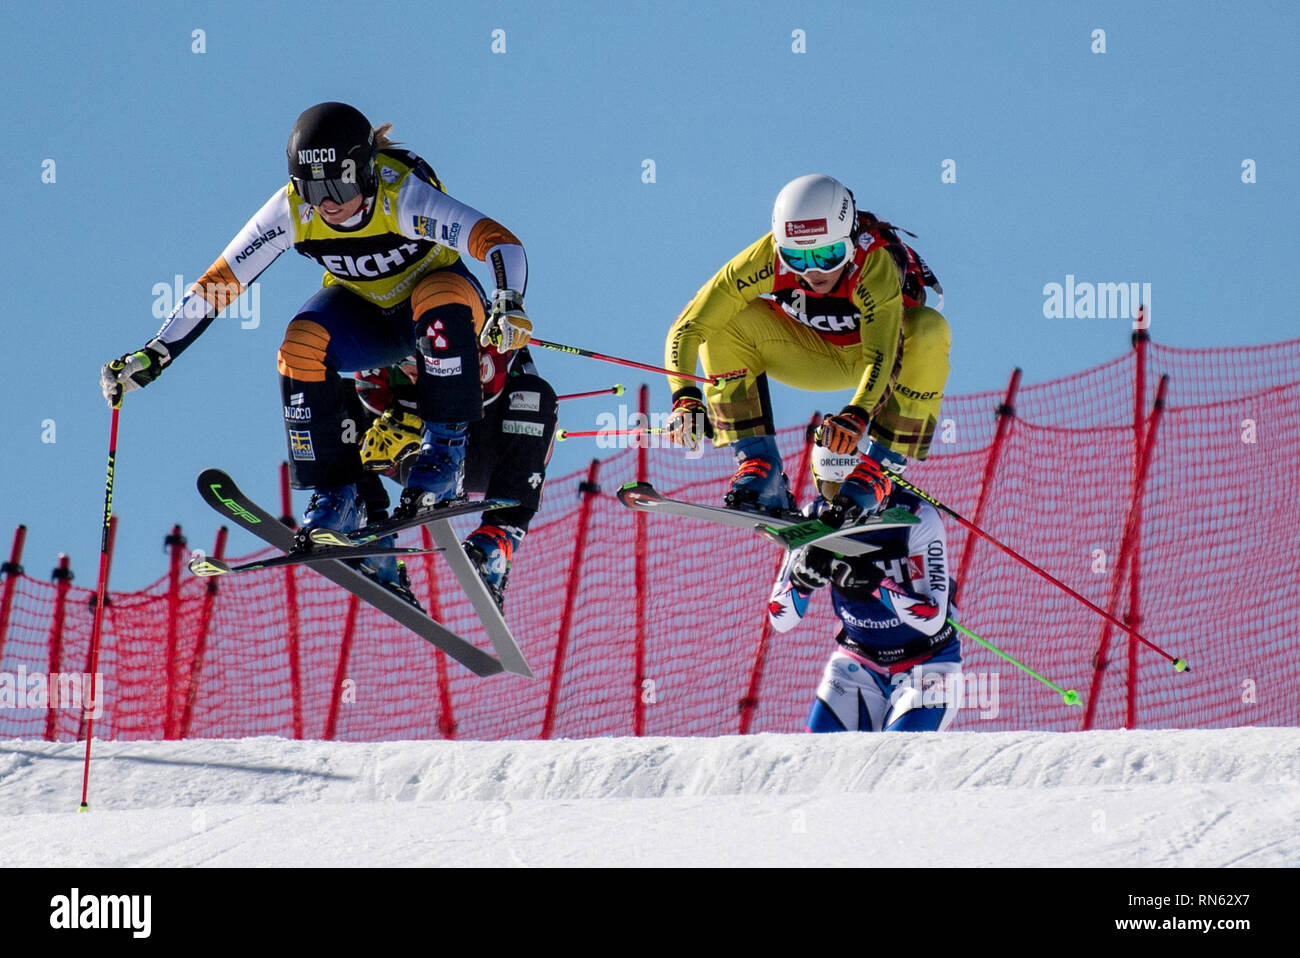 Feldberg, Germany. 17th Feb, 2019. Ski Cross: World Cup, quarter finals:  Lisa Andersson (l-r) from Sweden, Brittany Phelan from Canada, Daniela  Maier from Germany and Alizee Baron from France. Credit: Patrick  Seeger/dpa/Alamy